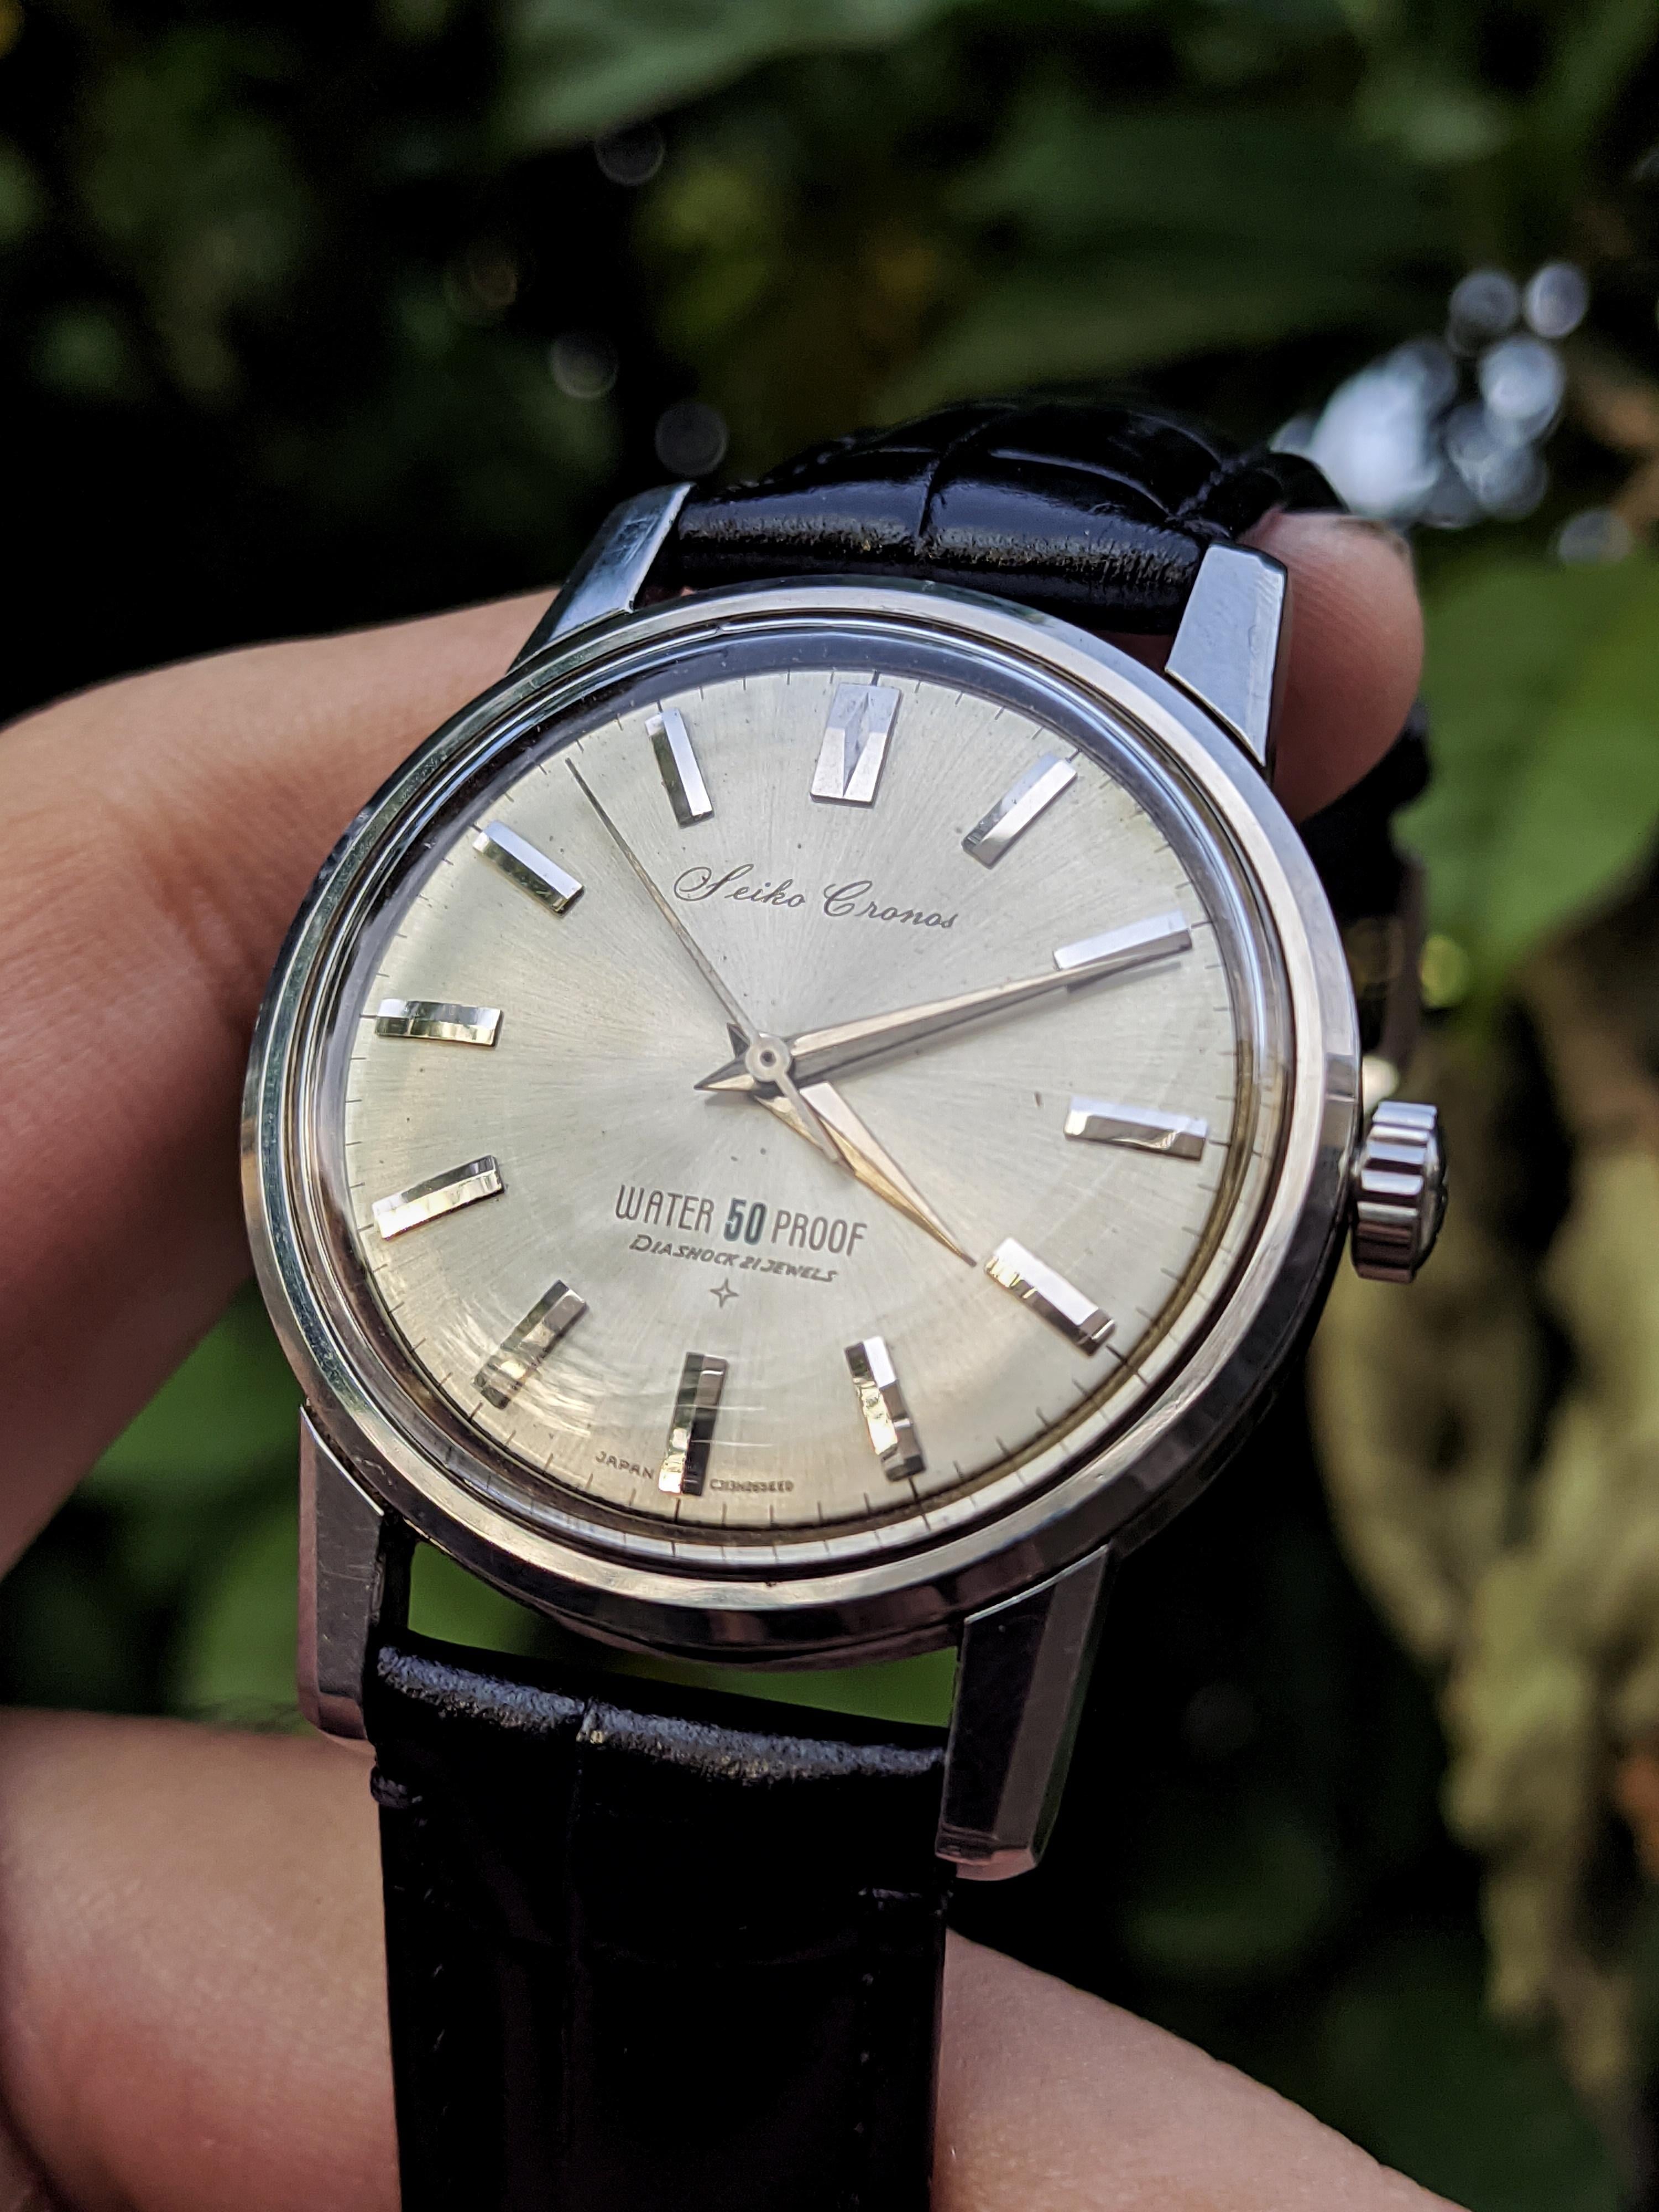 WTS] Seiko Cronos Water 50 Proof Vintage Dress Watch! $249 OBO